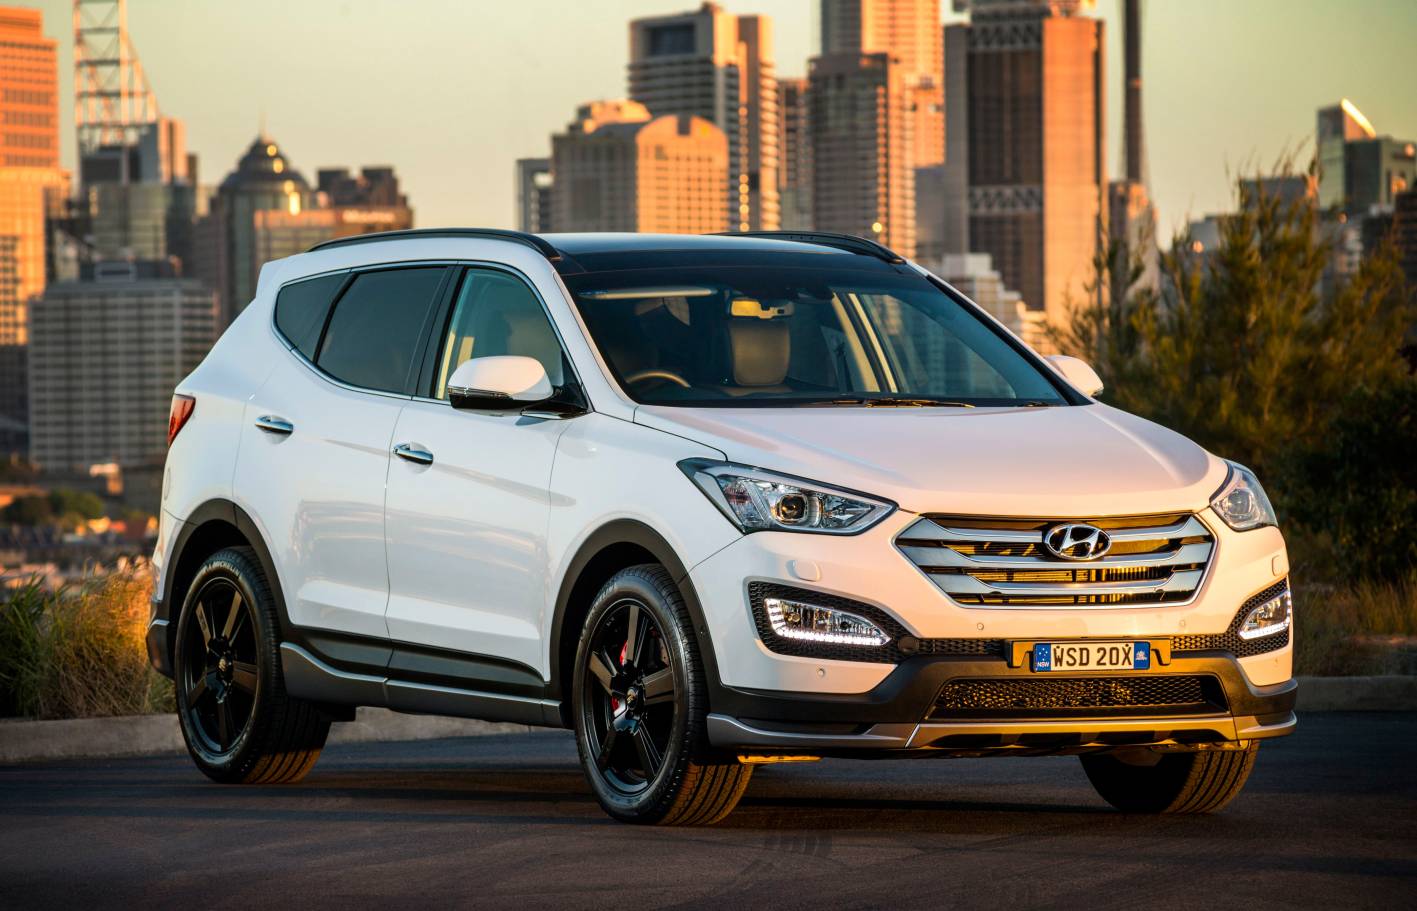 Hyundai Cars News Santa Fe updated for 2015 with new SR model